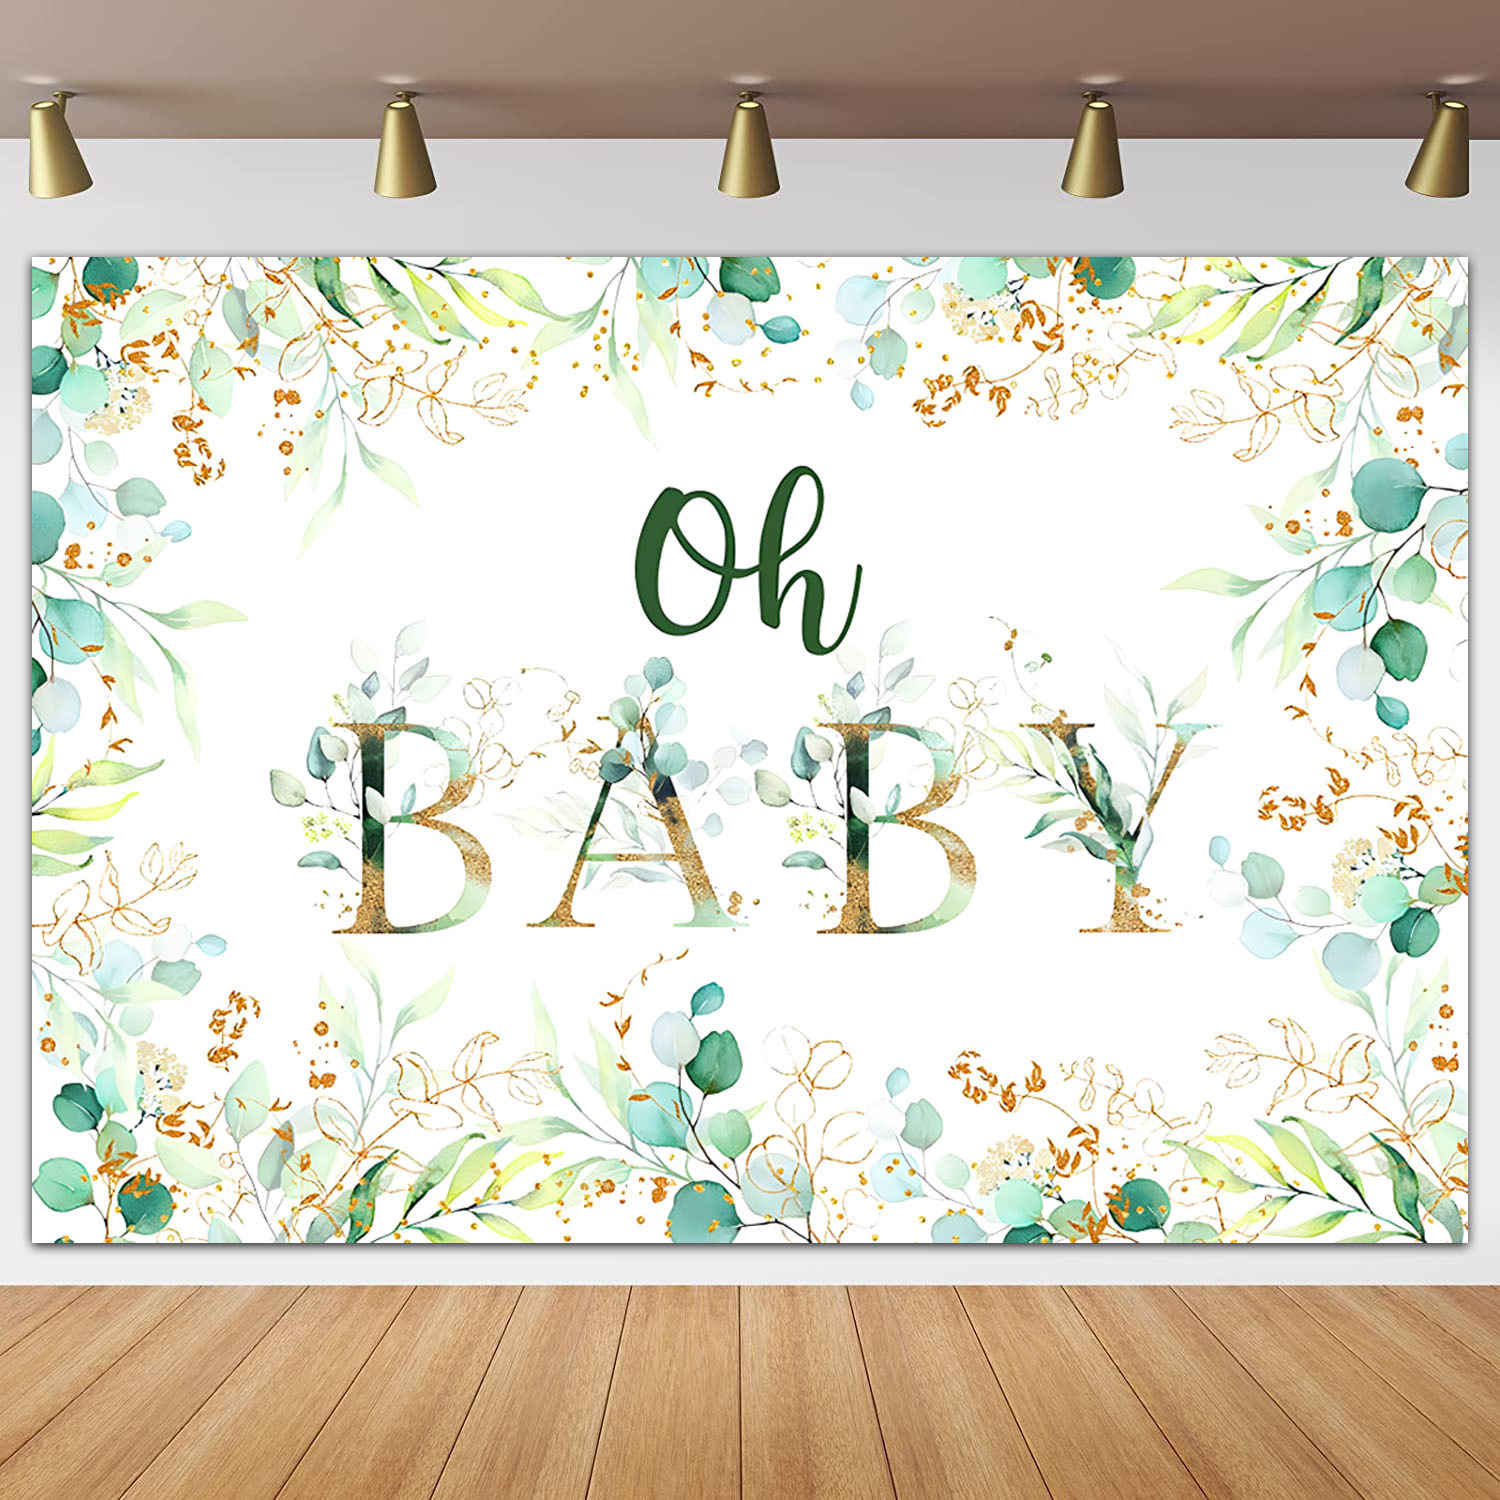 Jungle Baby Party Decoration Supplies Oh Baby Background Fabric Pink Oh Baby Banner Party Photo Background